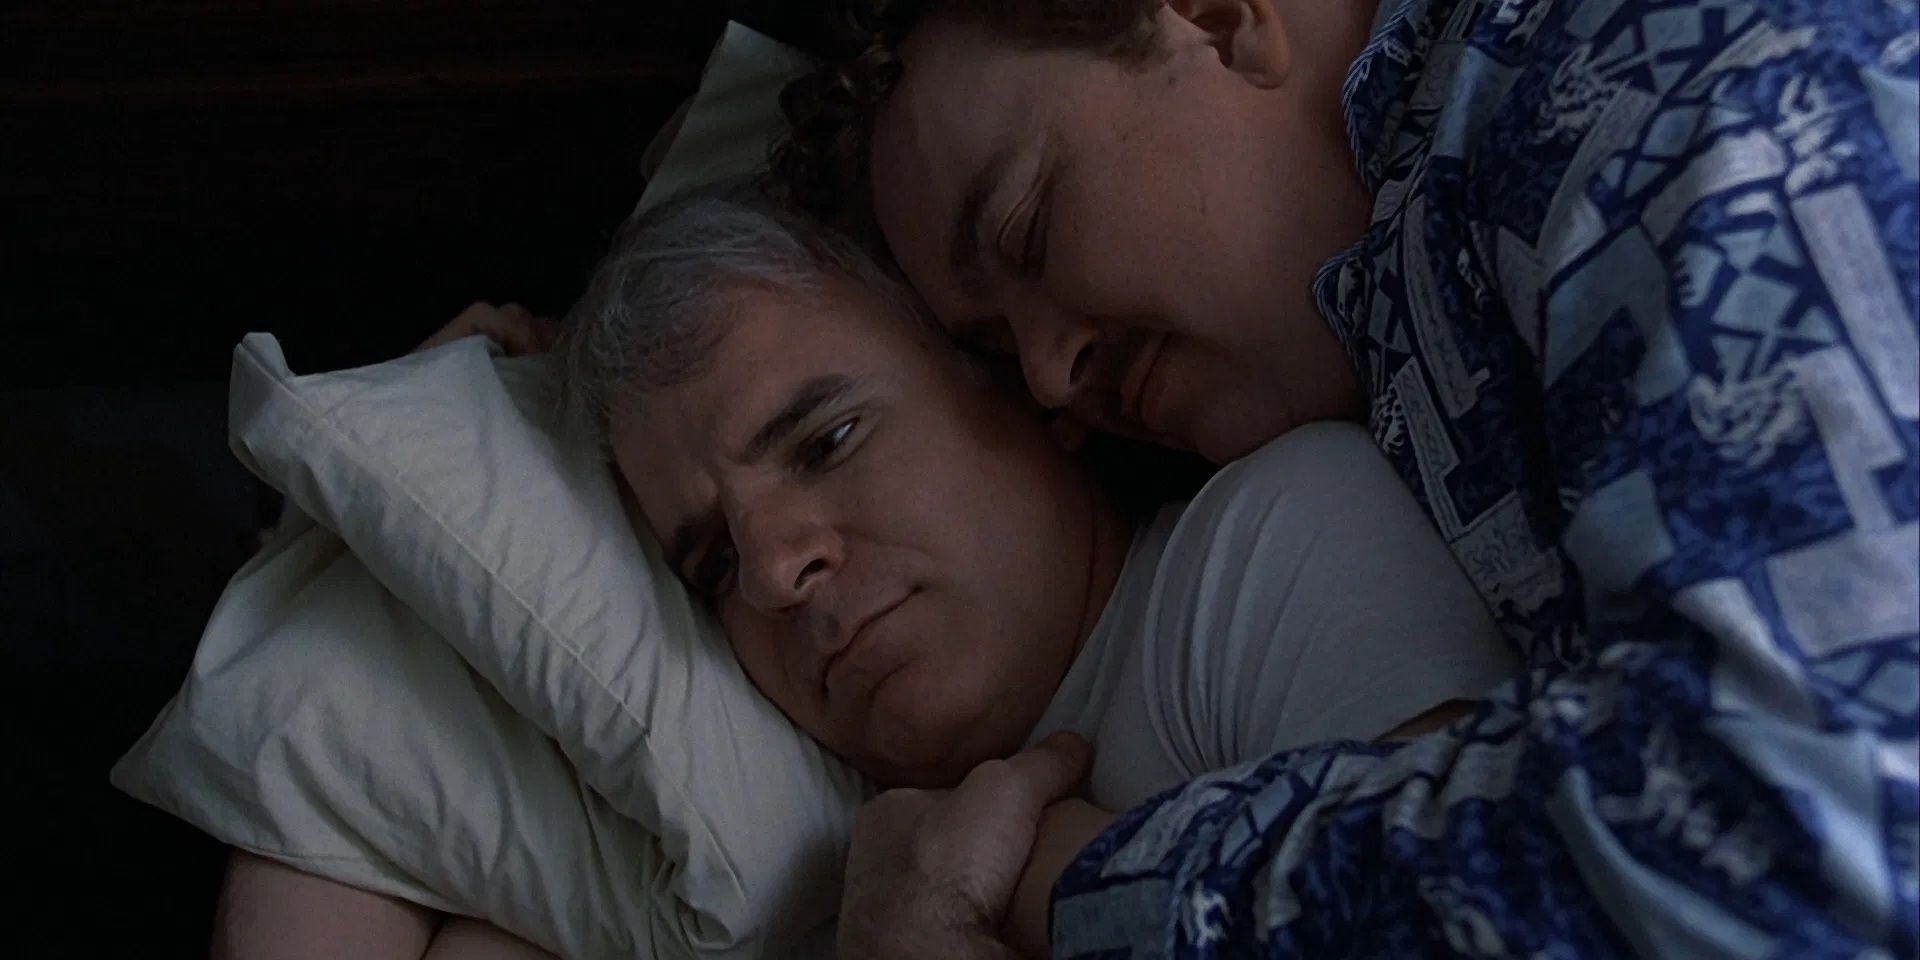 Steve Martin and John Candy in bed together in Planes Trains and Automobiles